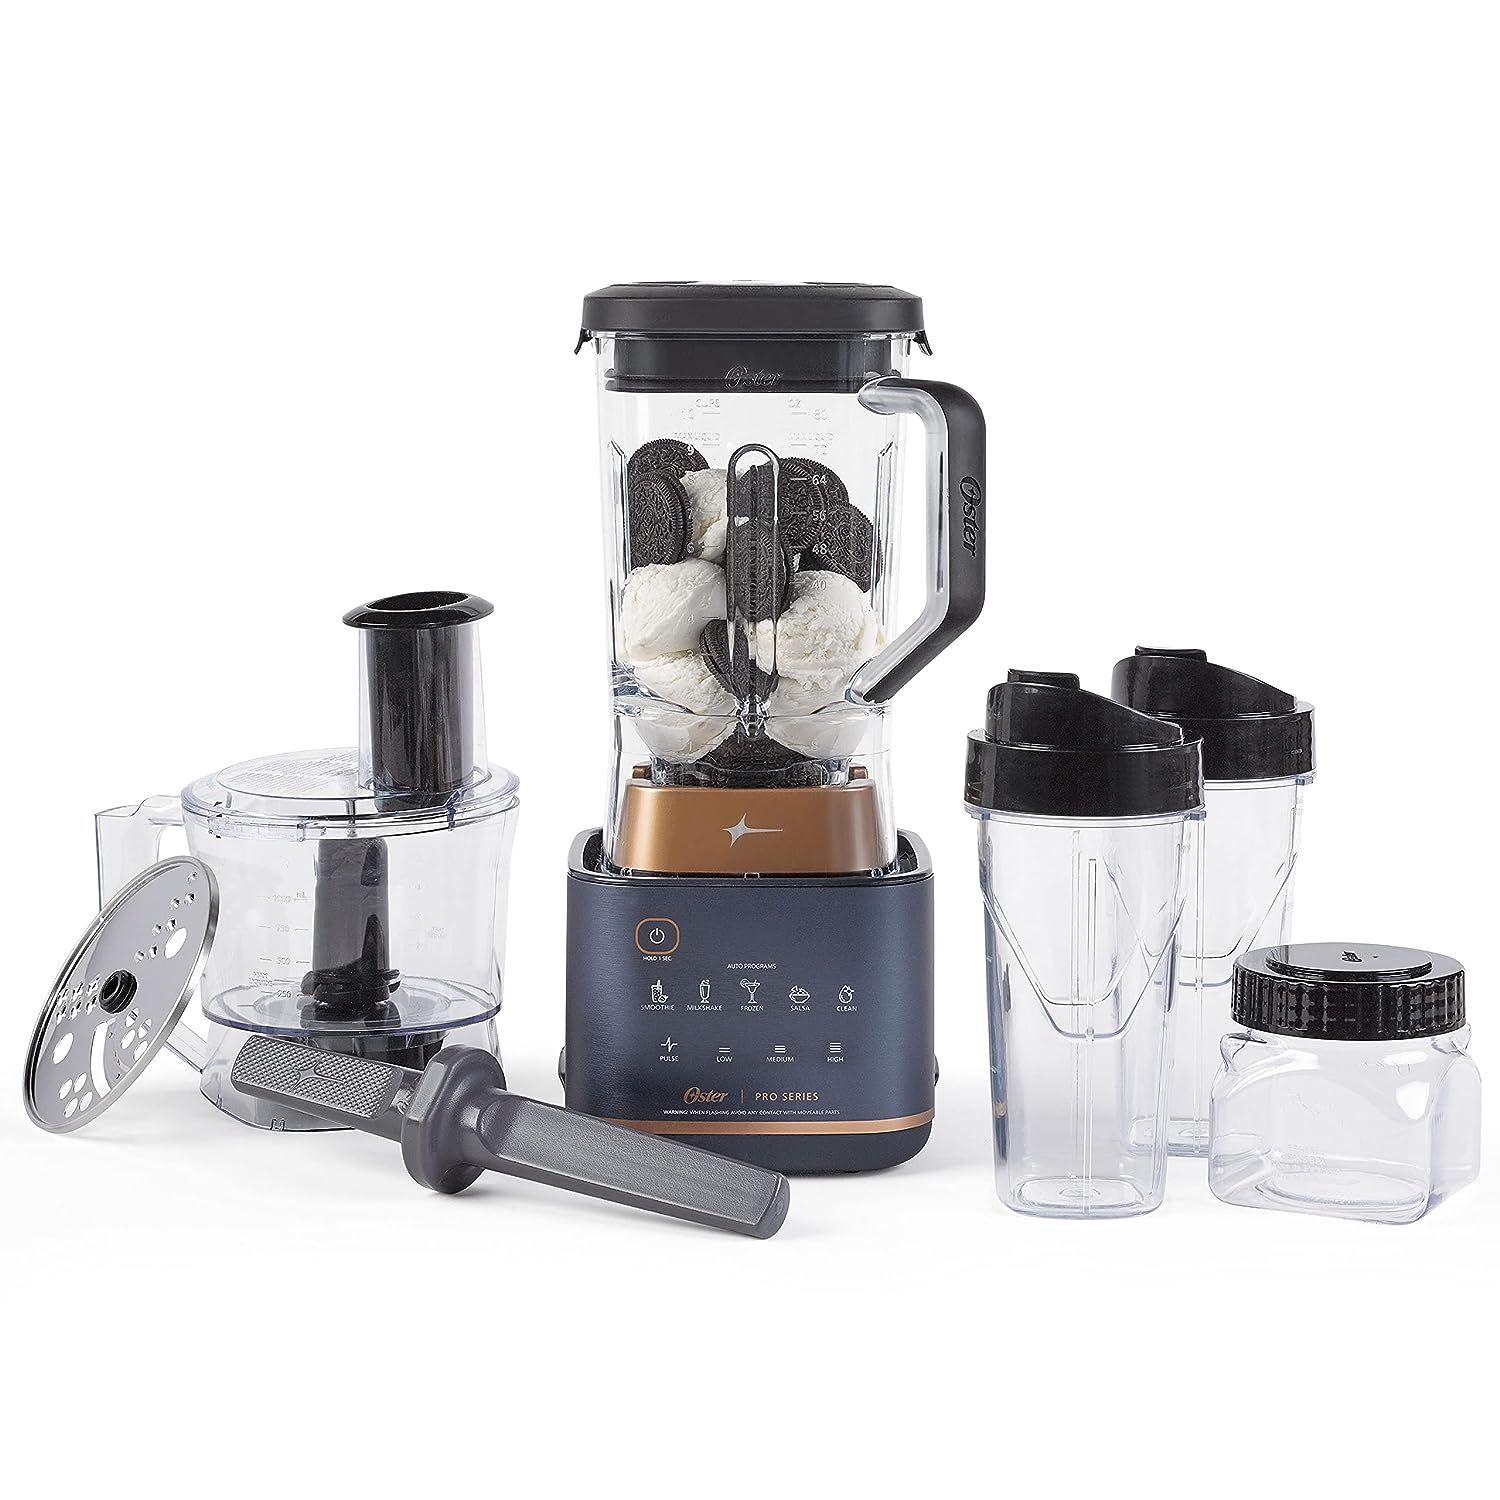 Oster 6640 10-Speed Blender with Plastic Jar and 50 similar items